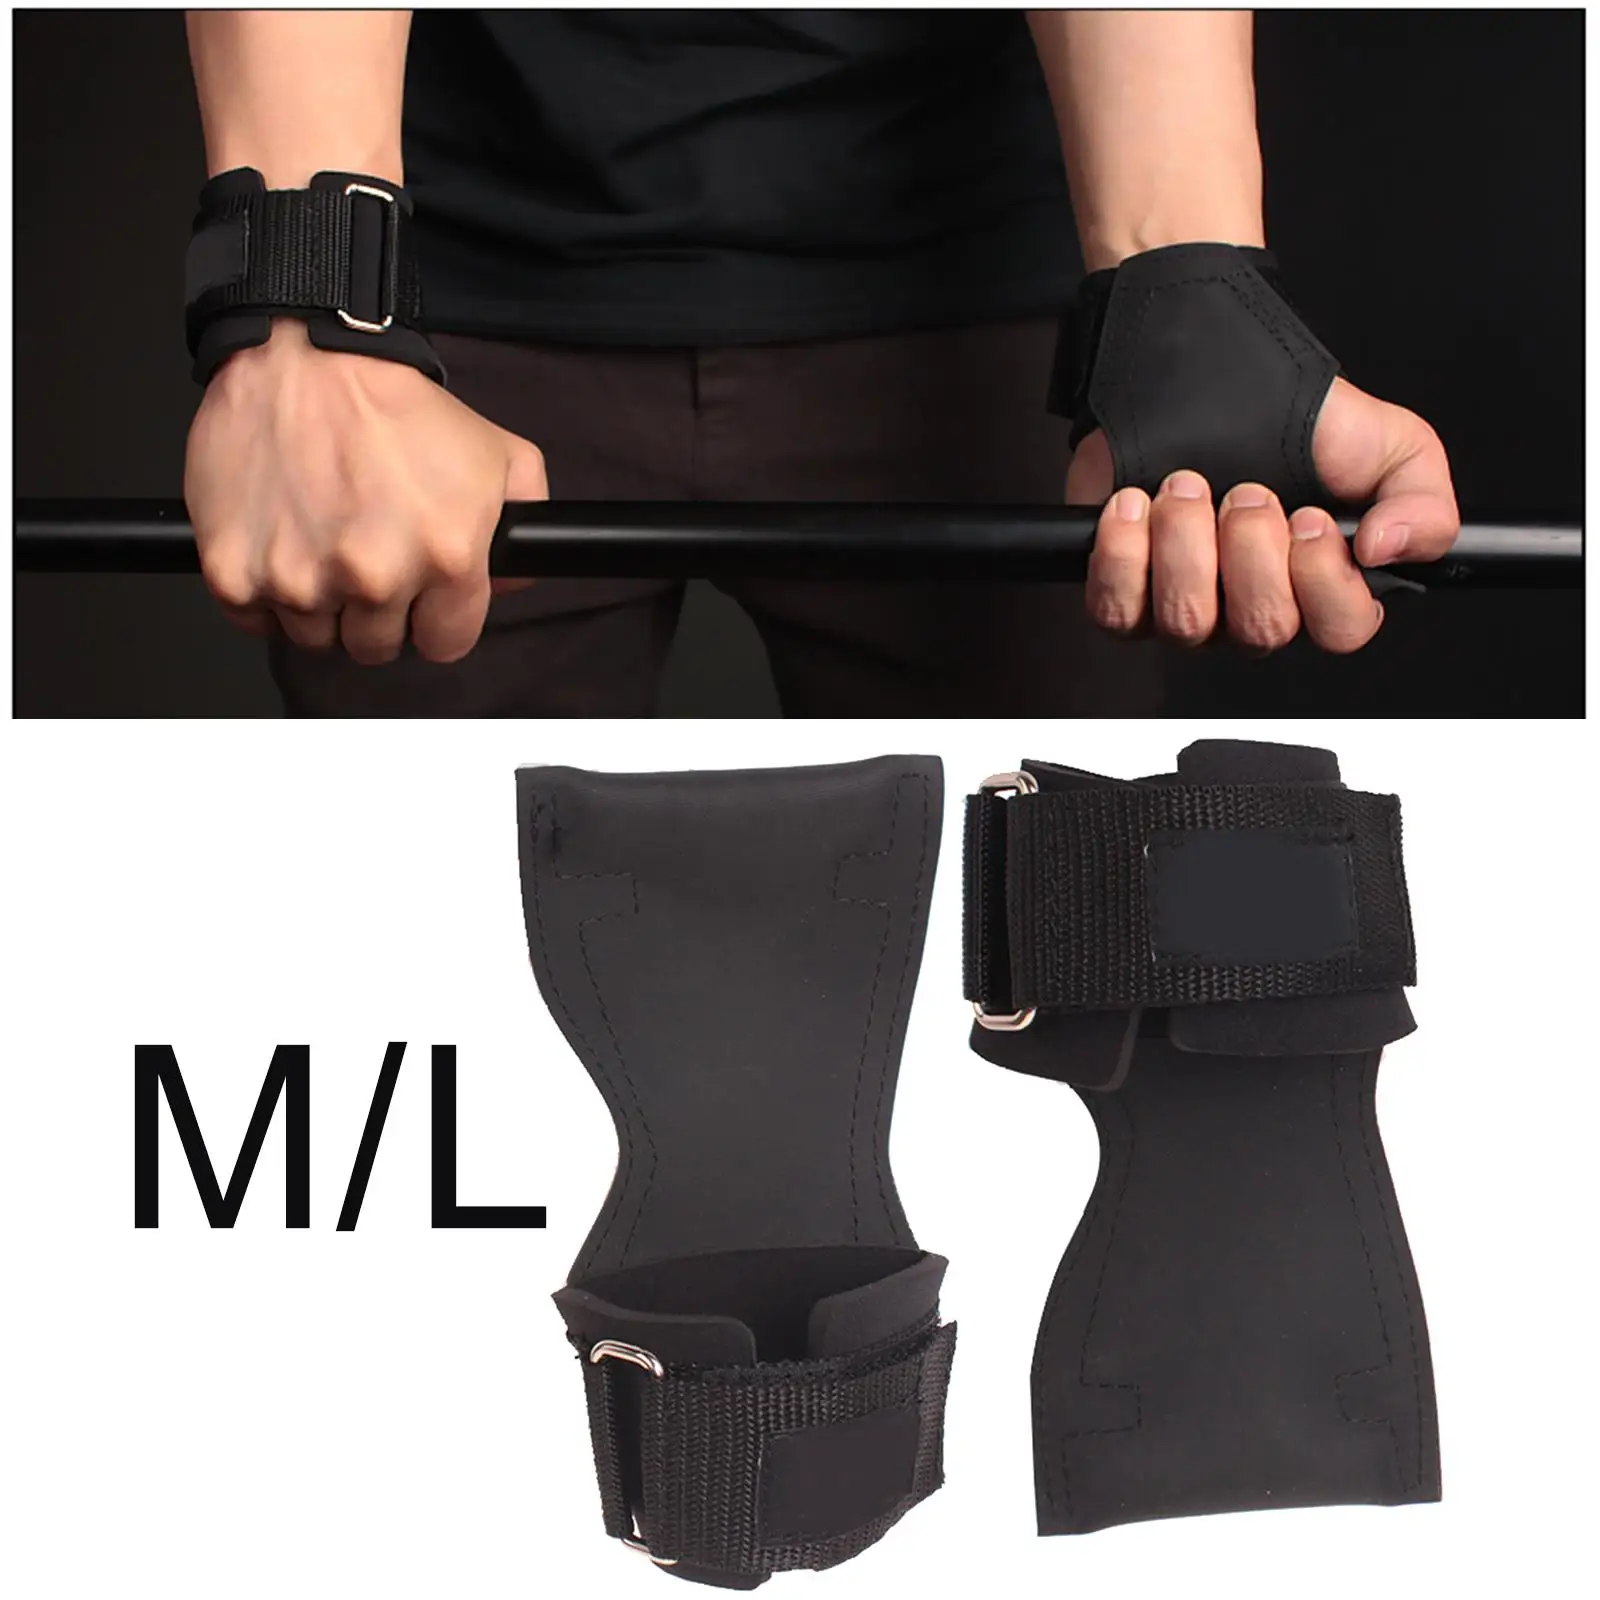 Weight Lifting Gloves with Wrist Wraps Hand Grips for Palm Protection Weightlifting Powerlifting Fitness Glove